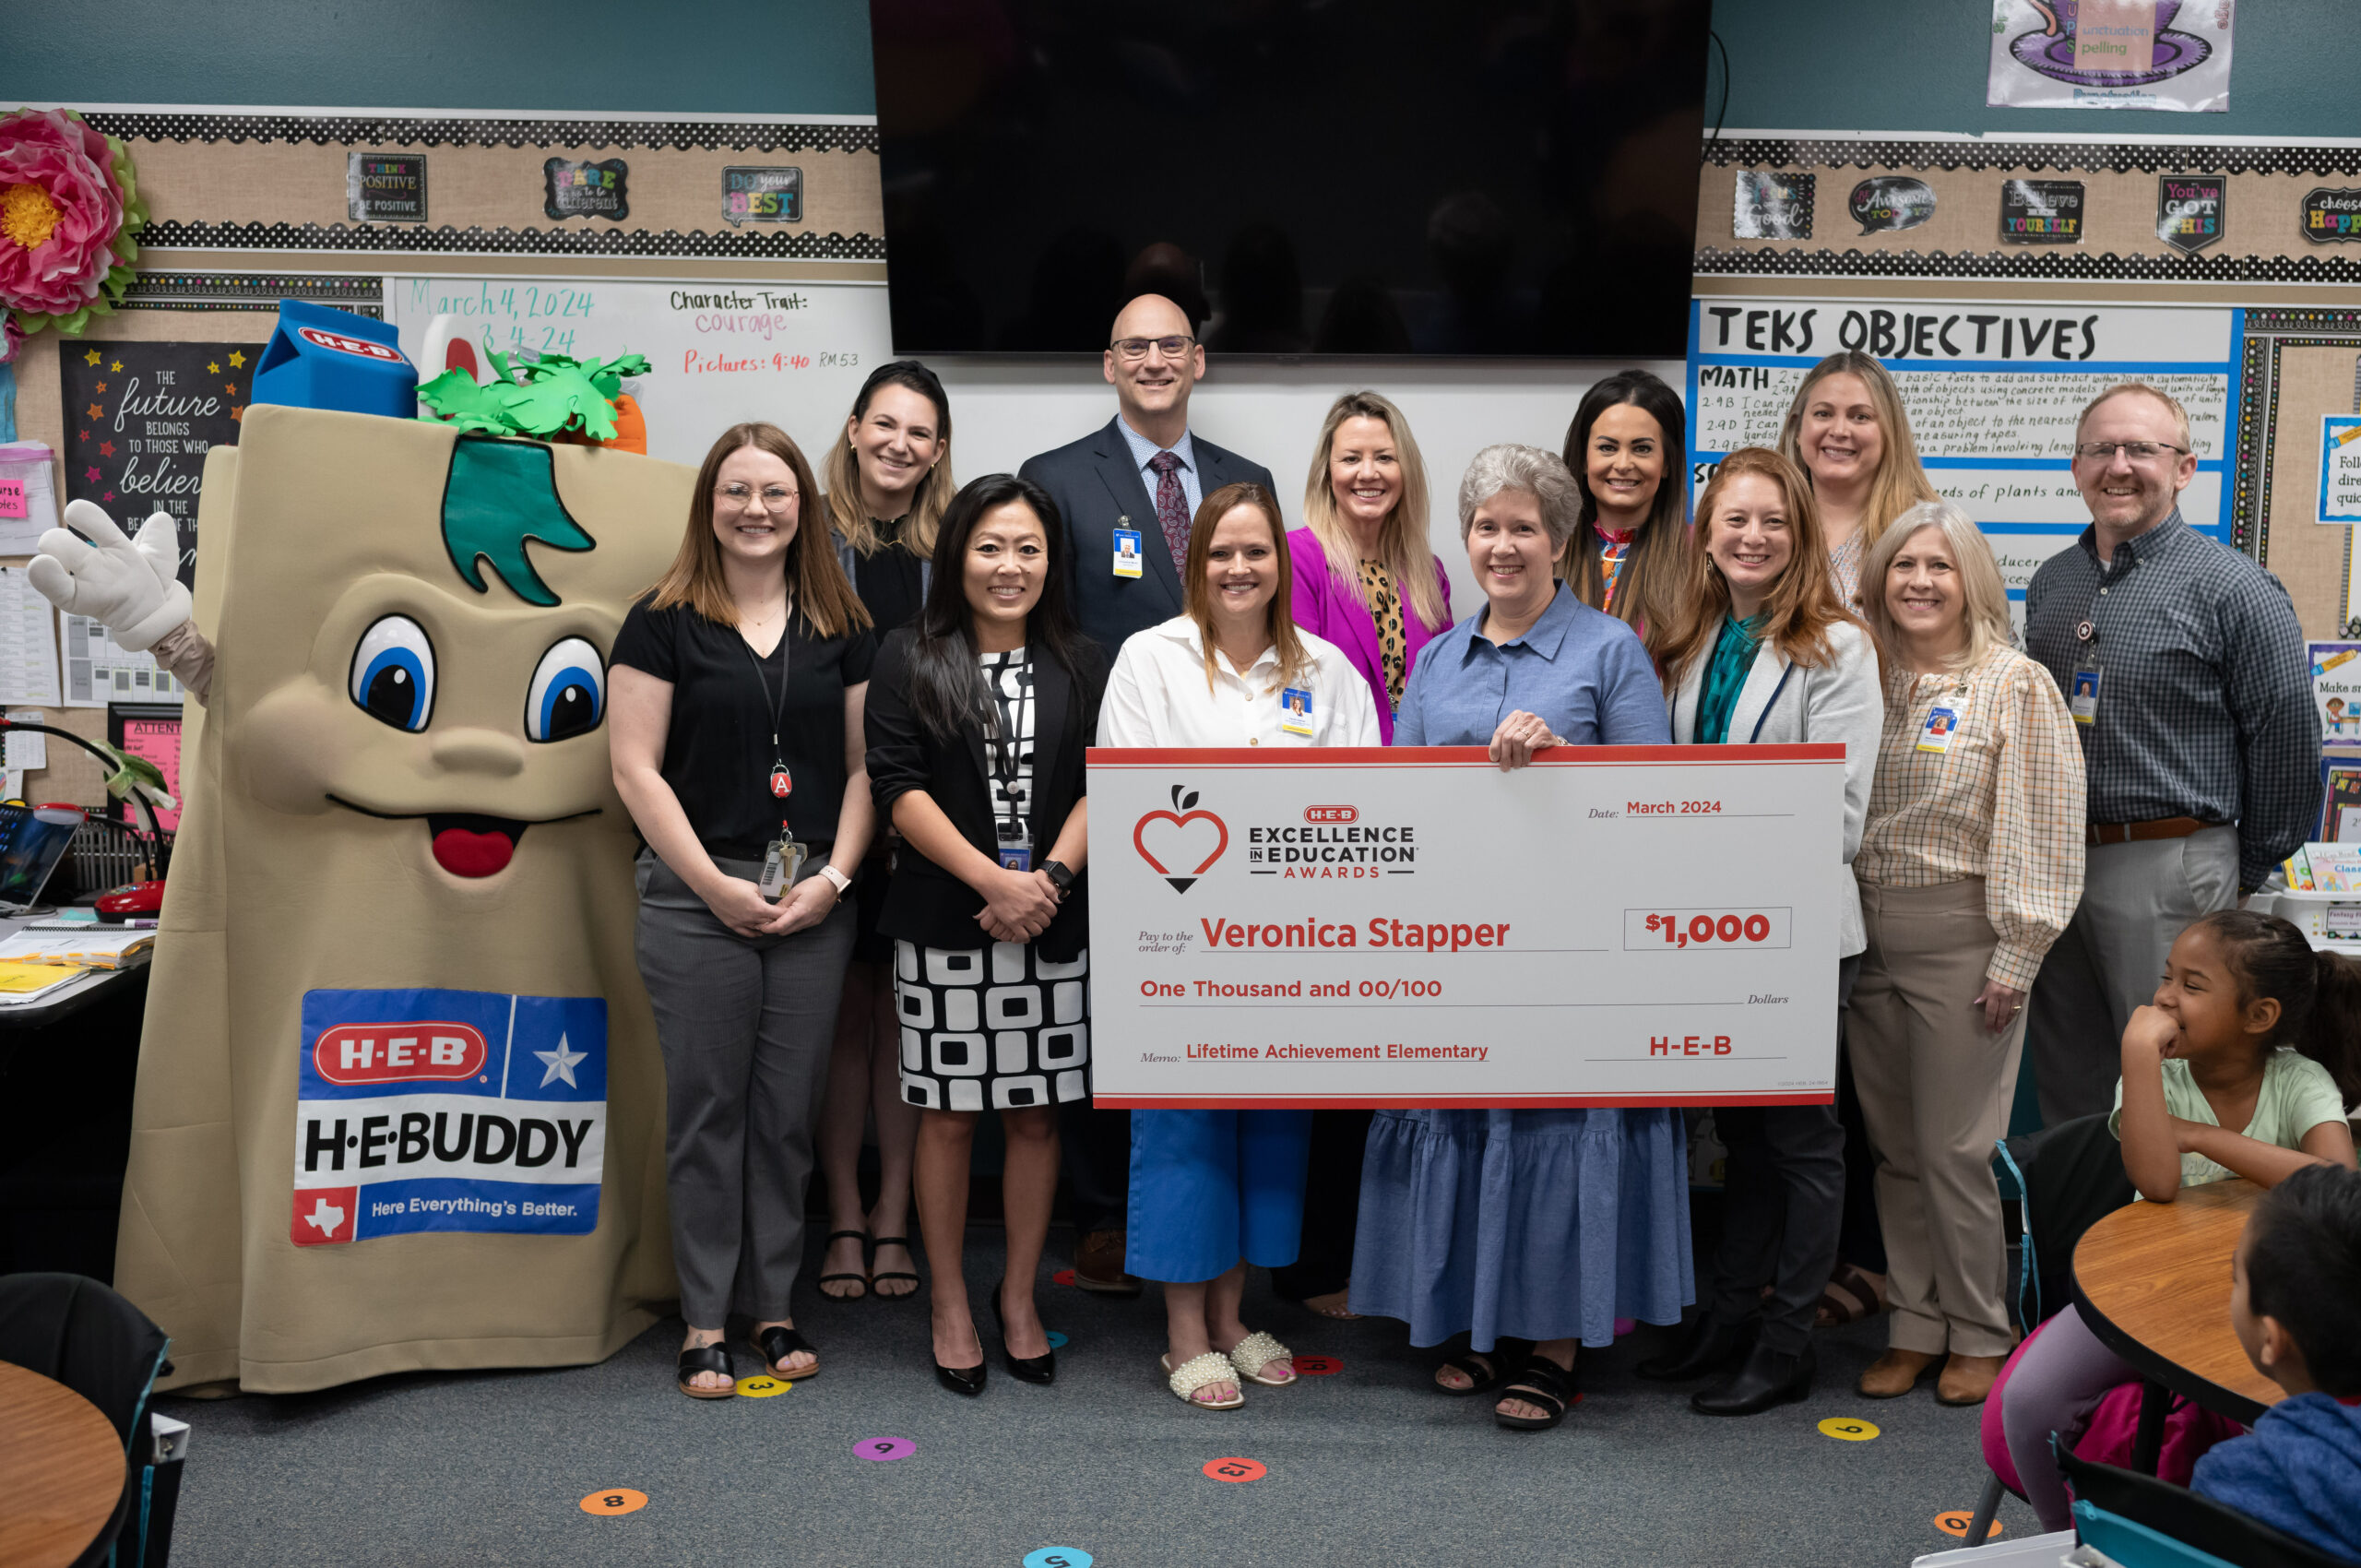 H-E-B Excellence in Education - North Texas Region